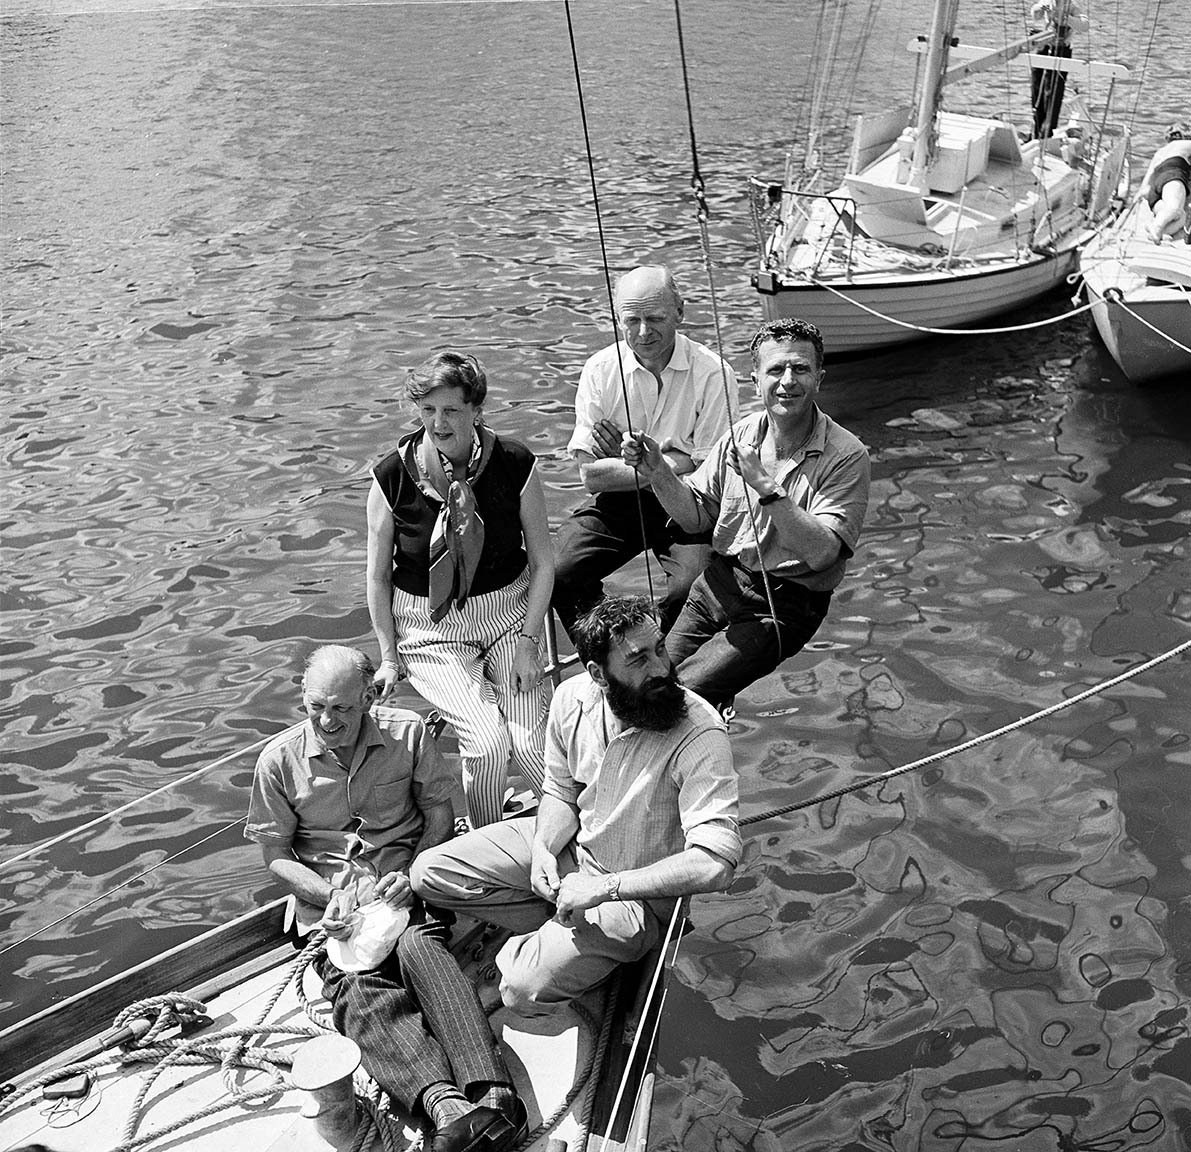 PICTURES OF YESTERYEAR - Managed by PPL - Copyright reserved Limited Edition Classic Boat fine art print: Circa 1960. 4 of the 5 skippers at the start of the first Observer singlehanded transatlantic race (OSTAR), Plymouth UK. Front: Francis Chichester, Val Howells, Sheila Chichester, Col 'Blondie' Haslar (bow) & Dr David Lewis. Frenchman Jean Lacombe arrived late for the start. PHOTO CREDIT: Eileen Ramsay/PPL Tel: +44(0)1243 555561 E.mail: ppl@mistral.co.uk Web: www.pplmedia.com *** Local Caption *** Circa 1960. 4 of the 5 skippers at the start of the first Observer singlehanded transatlantic race (OSTAR), Plymouth UK. Front: Francis Chichester, Val Howells, Sheila Chichester, Col 'Blondie' Haslar (bow) & Dr David Lewis. Frenchman Jean Lacombe arrived late for the start.